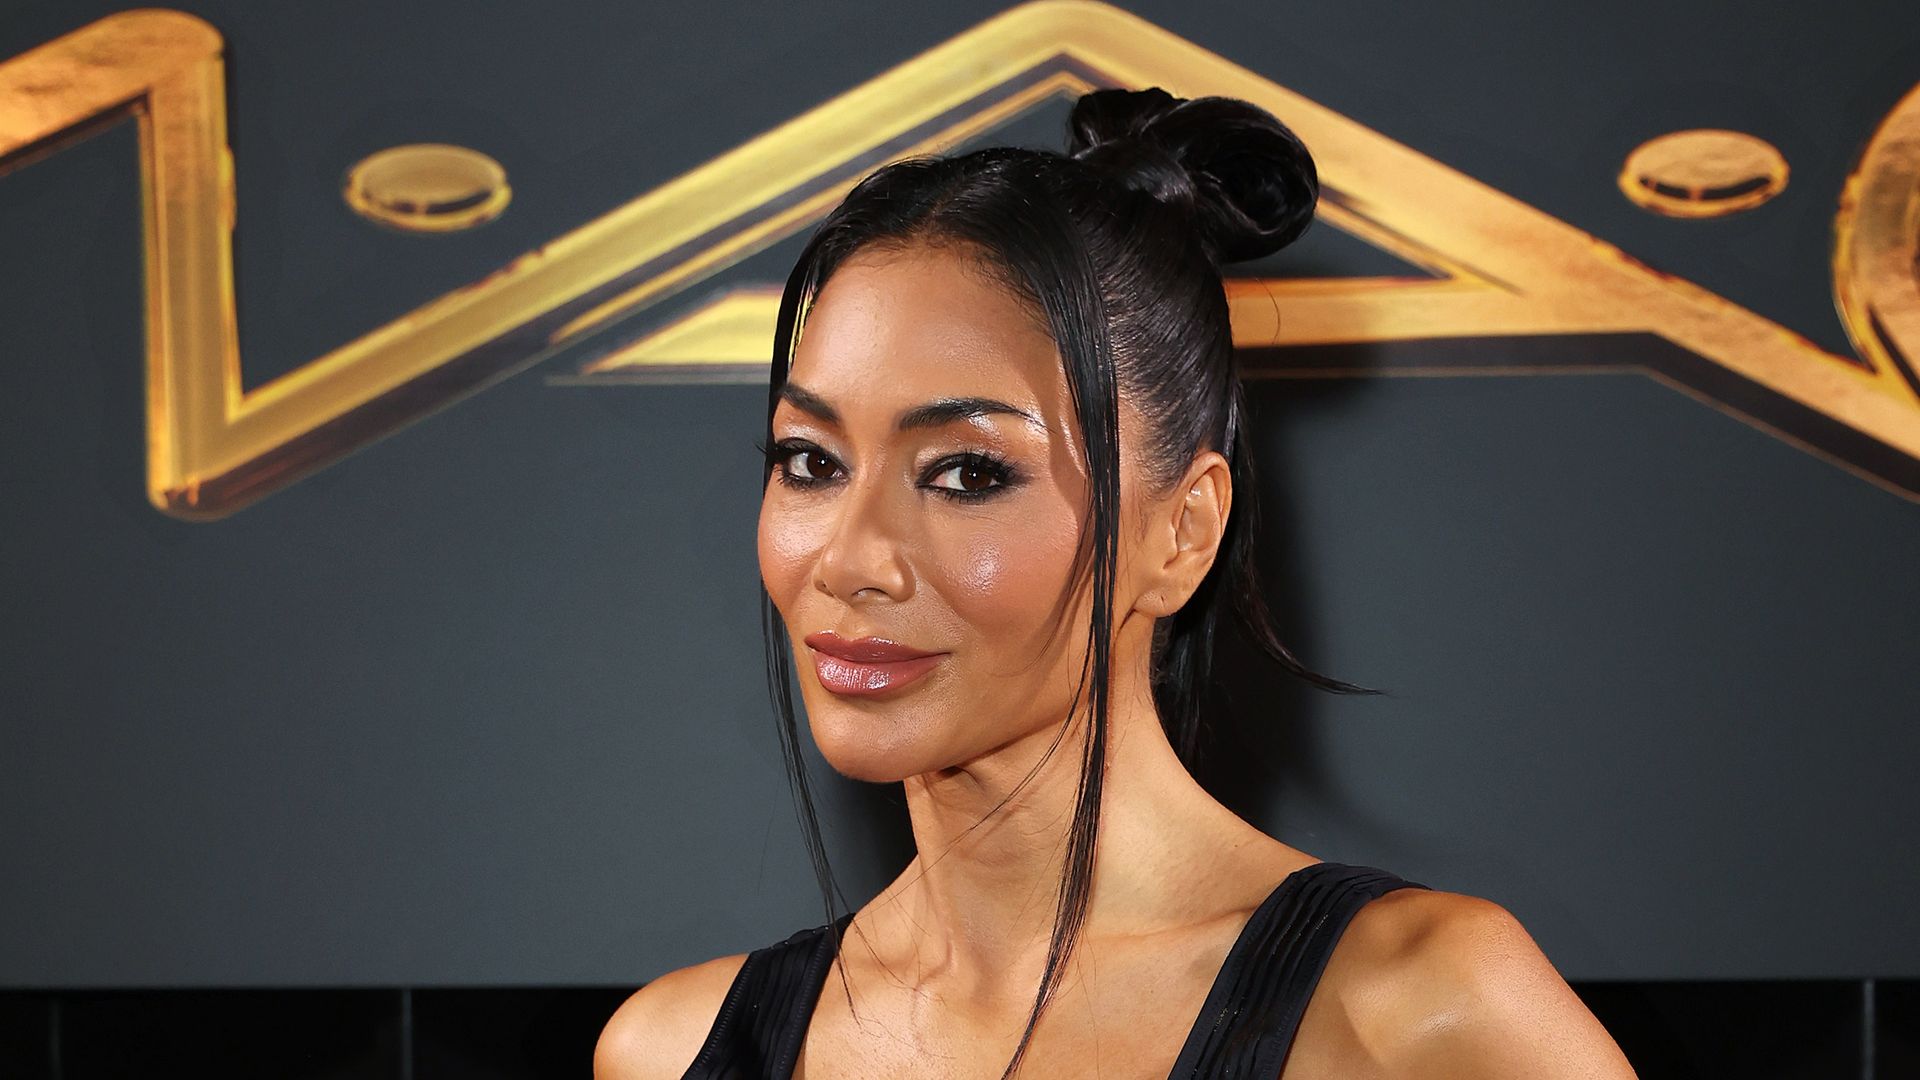 Nicole Scherzinger attends MAC Cosmetics' 'The Face Show during London Fashion Week September 2023 at Outernet London on September 17, 2023 in London, England.